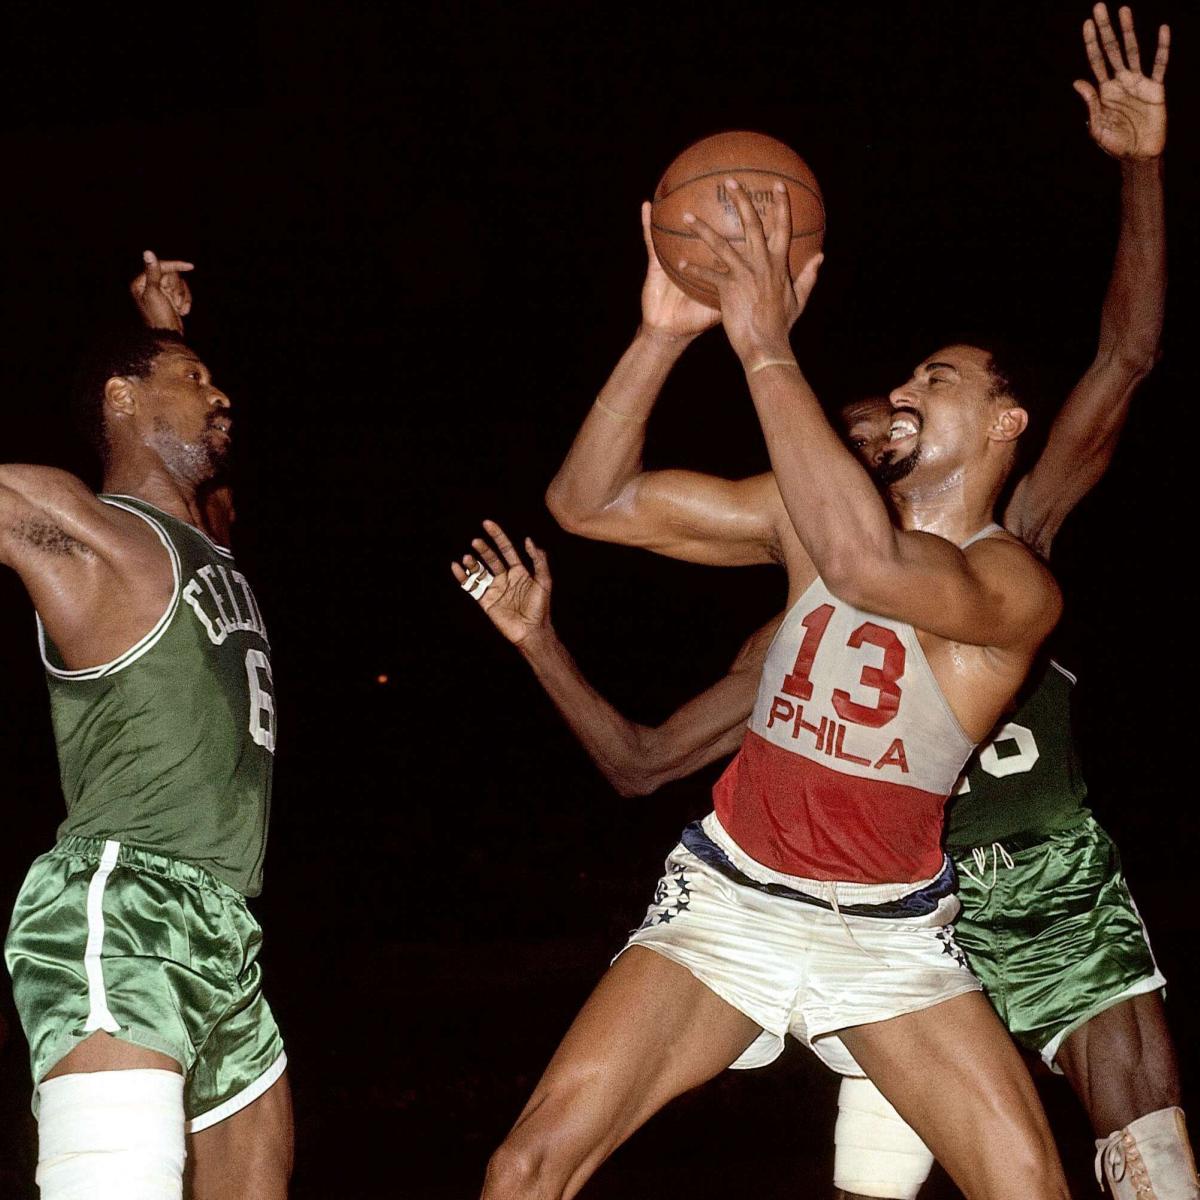 A Young Wilt Chamberlain Is So Lanky He Looks Like a Caricature.